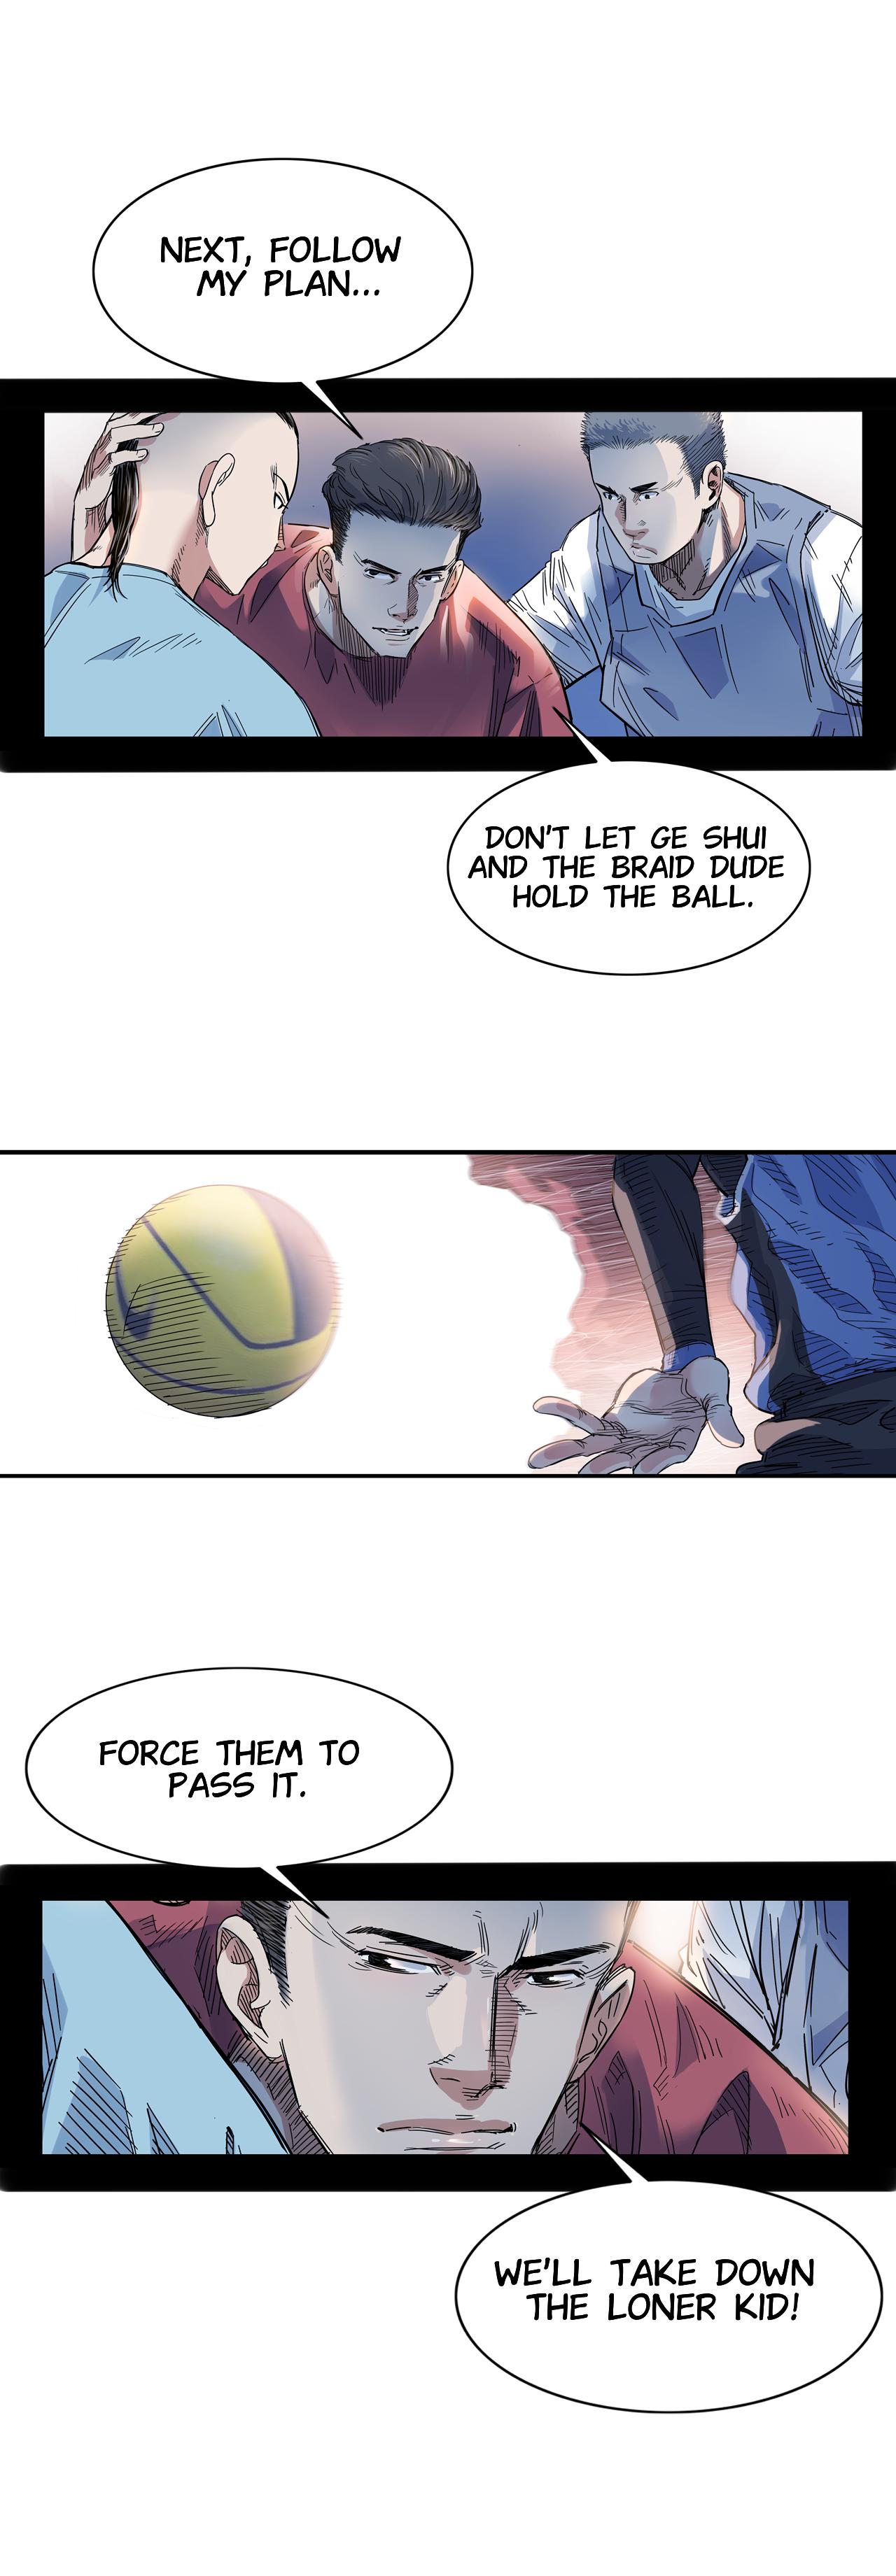 Streetball In The Hood - Page 2